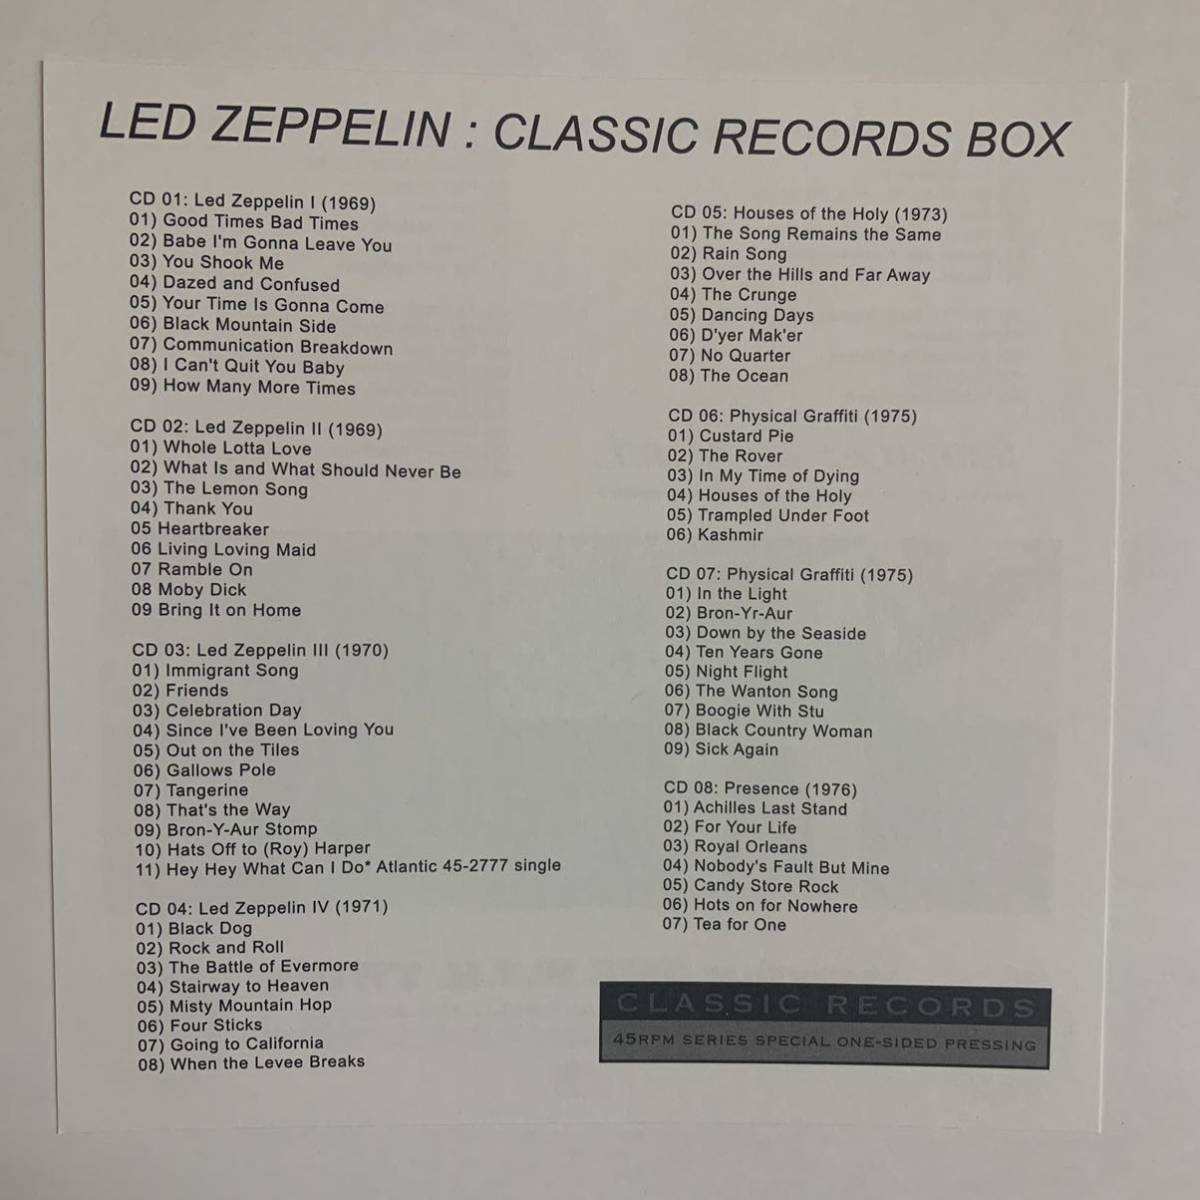 LED ZEPPELIN / CLASSIC RECORDS BOX -45RPM SERIES SPECIAL ONE-SIDED PRESSING 12CD BOX SET 遂に登場です！MUST BUY！の画像4